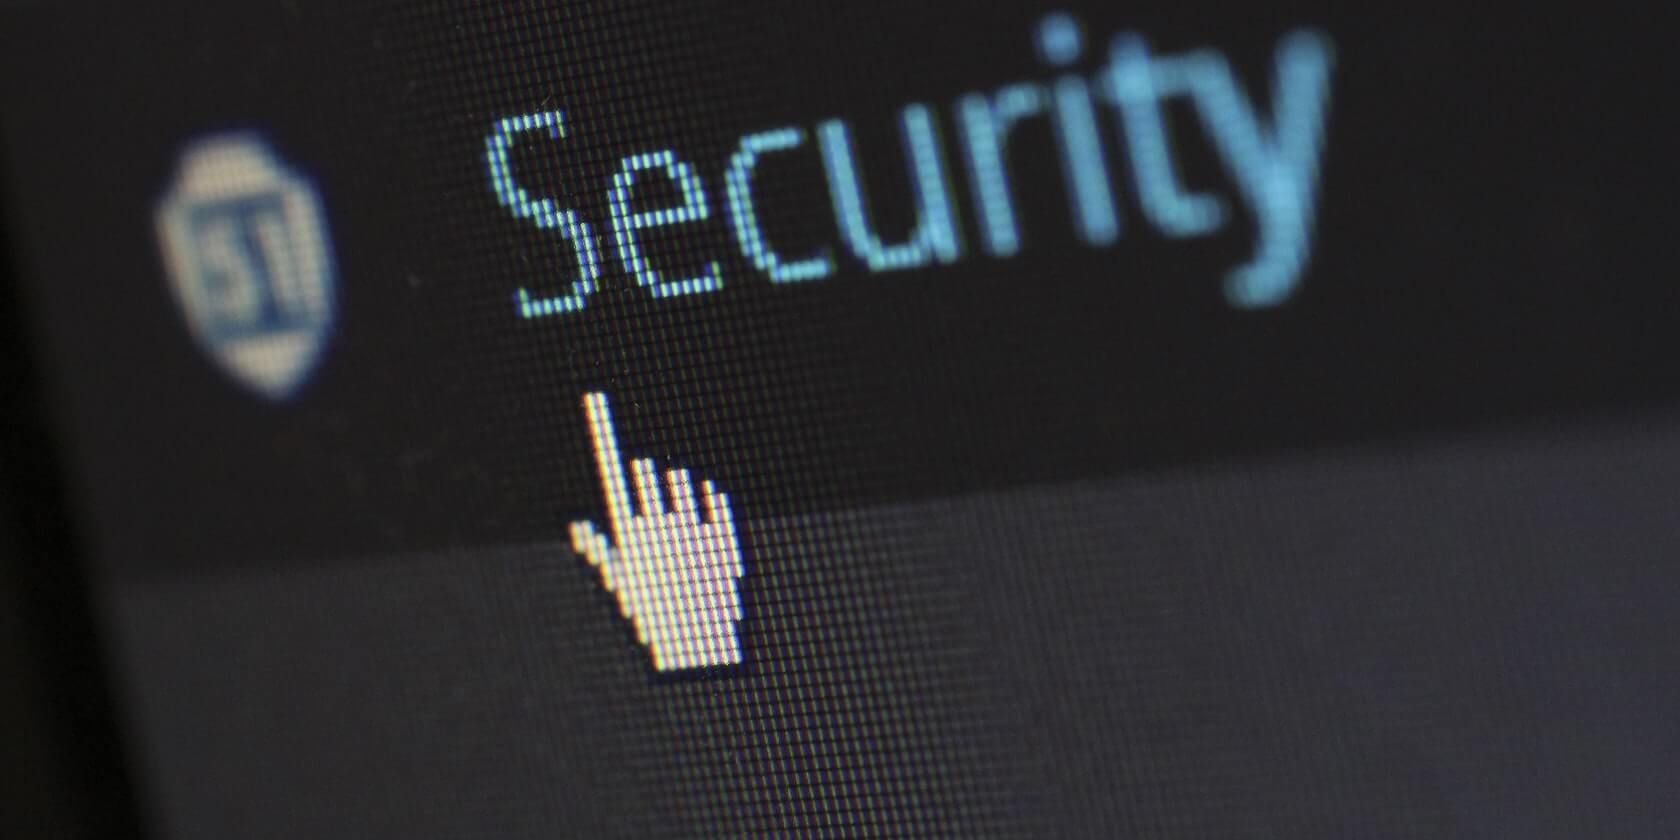 How to Secure Your WordPress Website in 5 Simple Steps